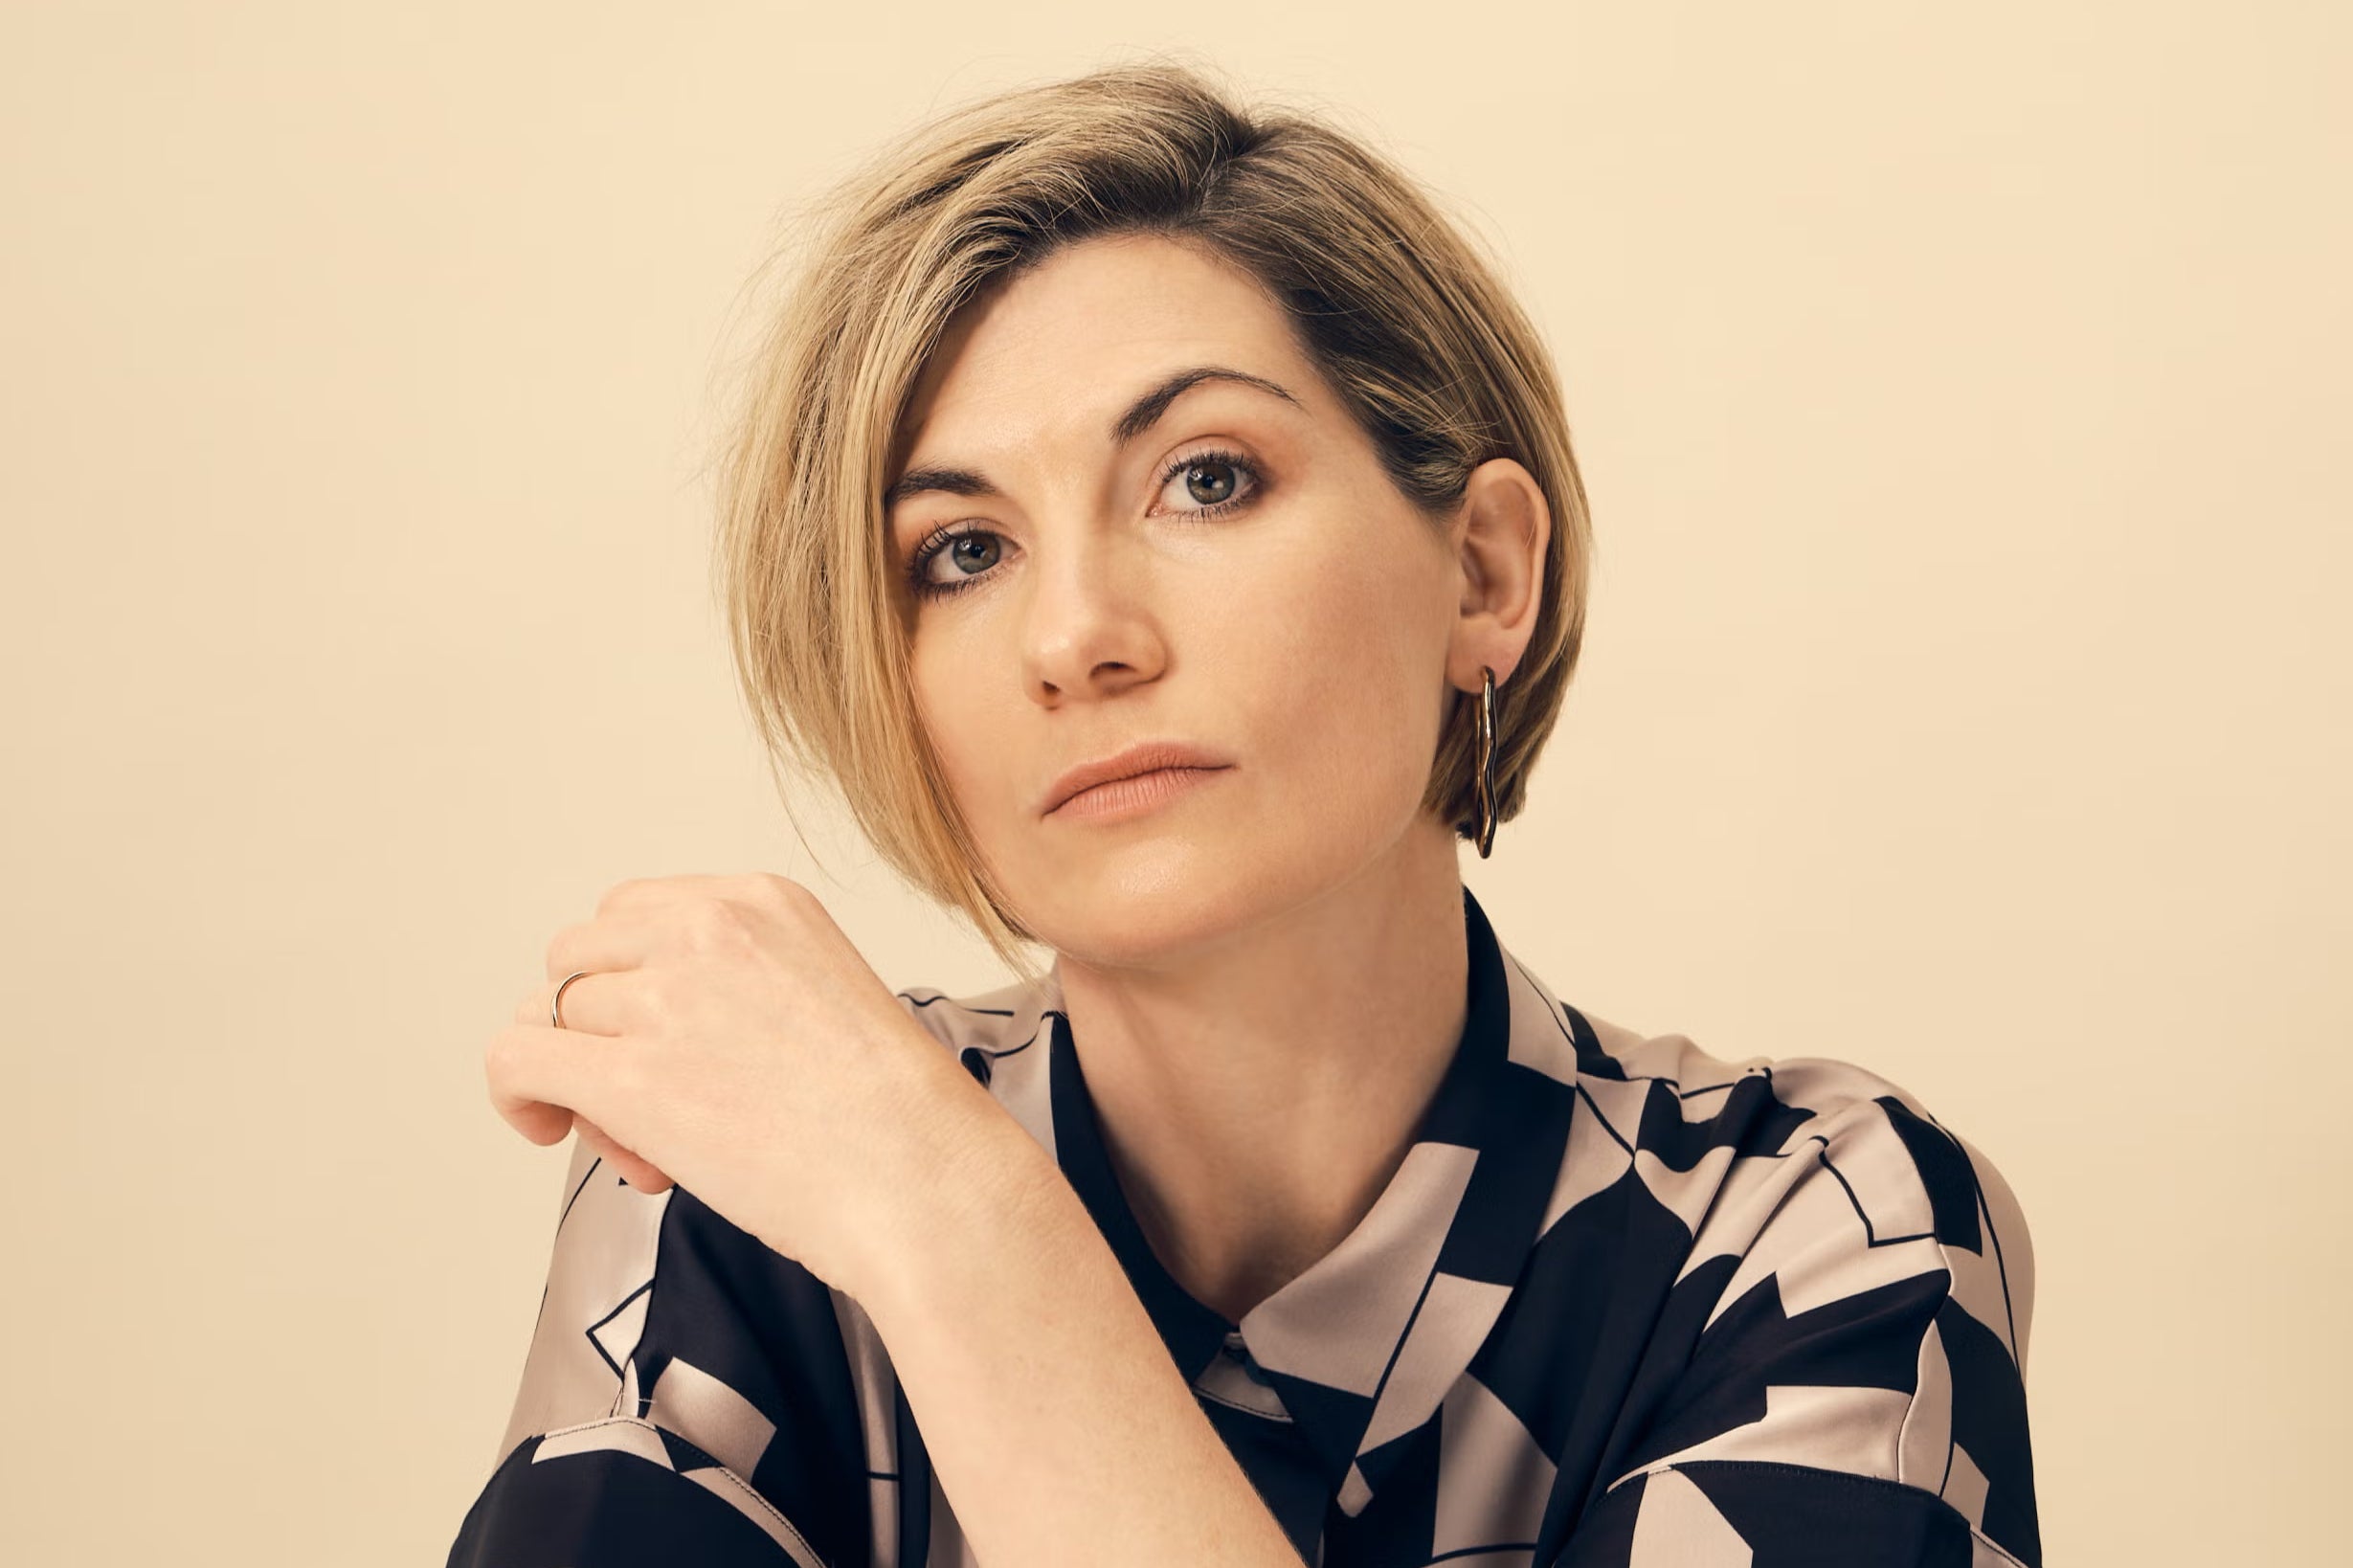 Jodie　The　I'm　that　on　intimacy　the　Who,　forever　be　playing　'I　Doctor'　and　grief-ridden　'leccy　Doctor　Whittaker　Independent　will　fiddling'　coordinators:　not